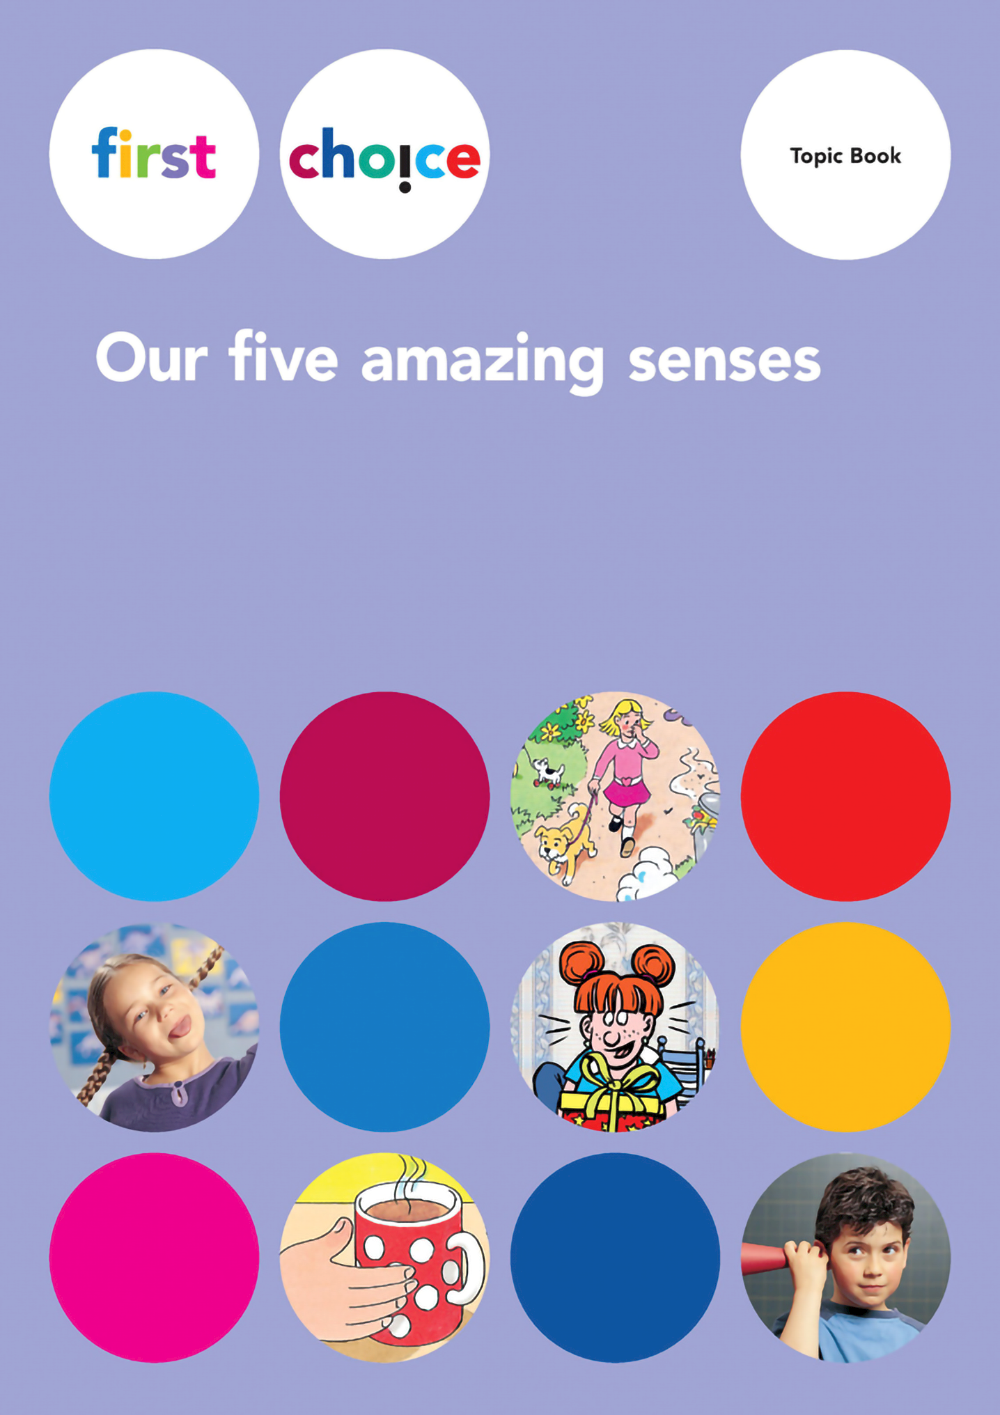 First Choice - Our five amazing senses